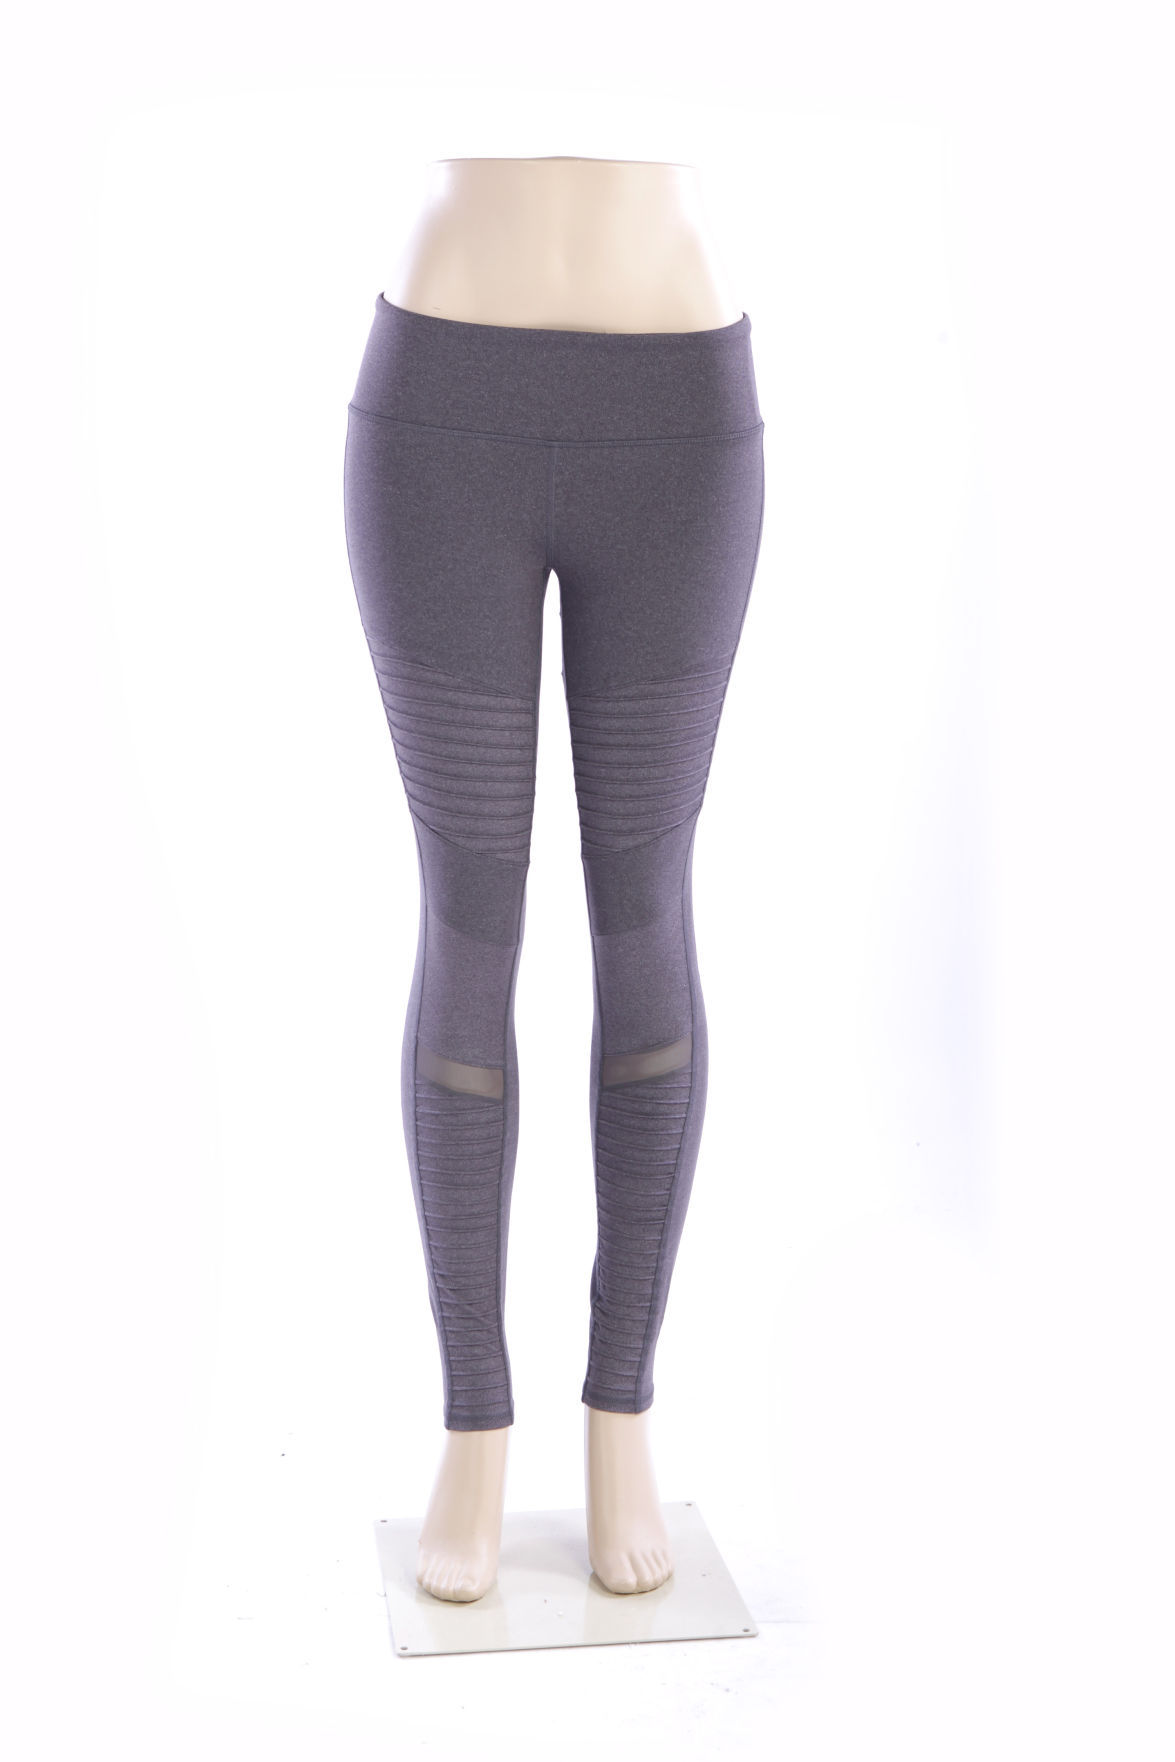 Trending Now: January Athletic Wear | Fashion | nwitimes.com